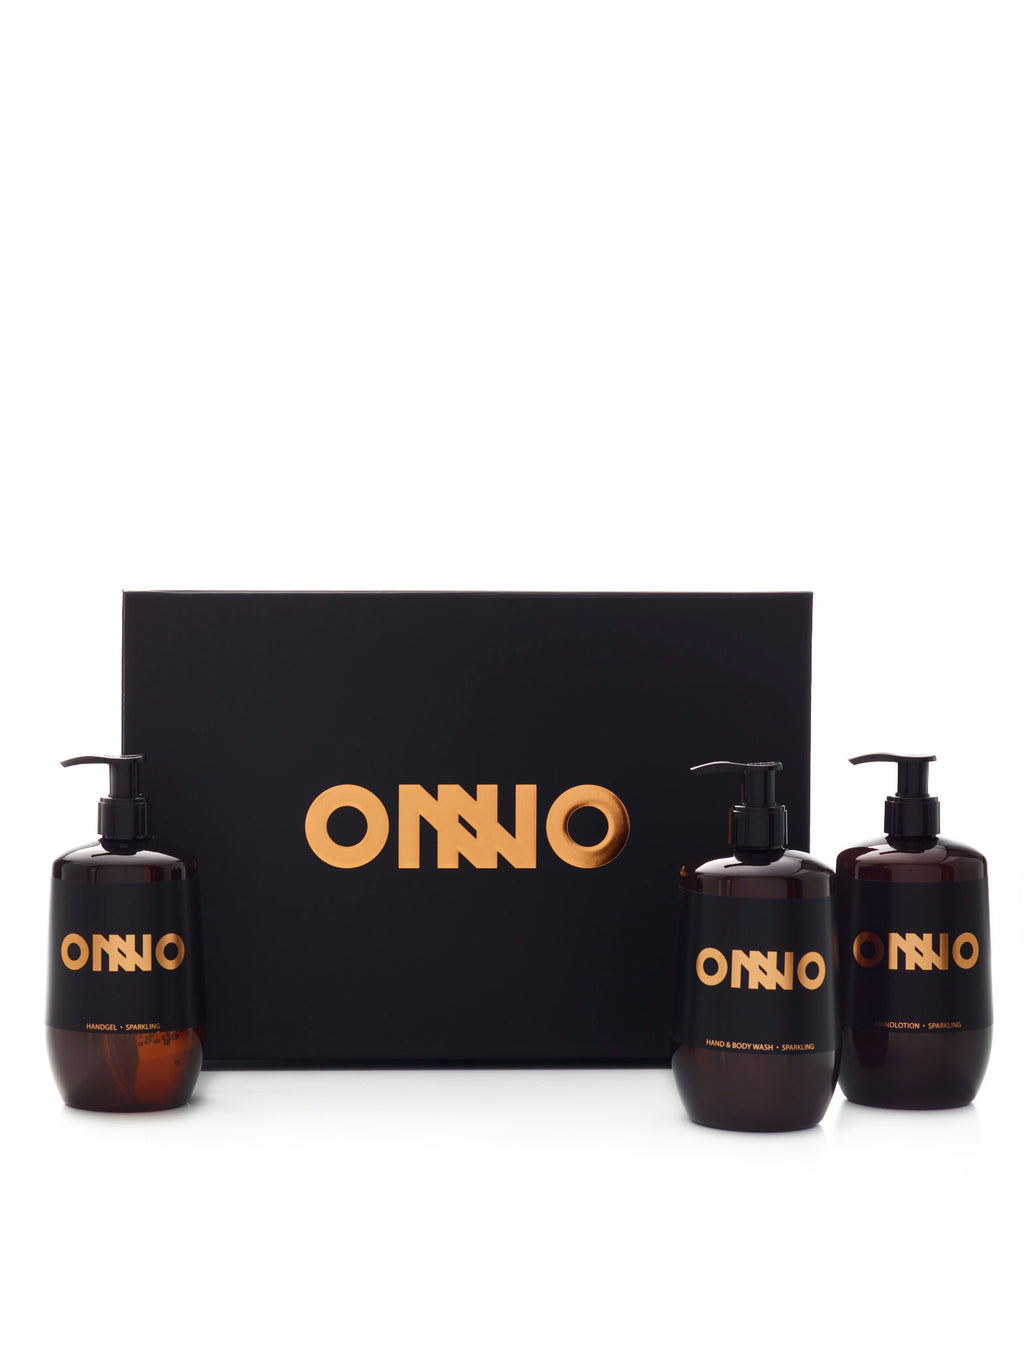 ONNO - HAND & BODY CARE COLLECTION - SPARKLING BOX